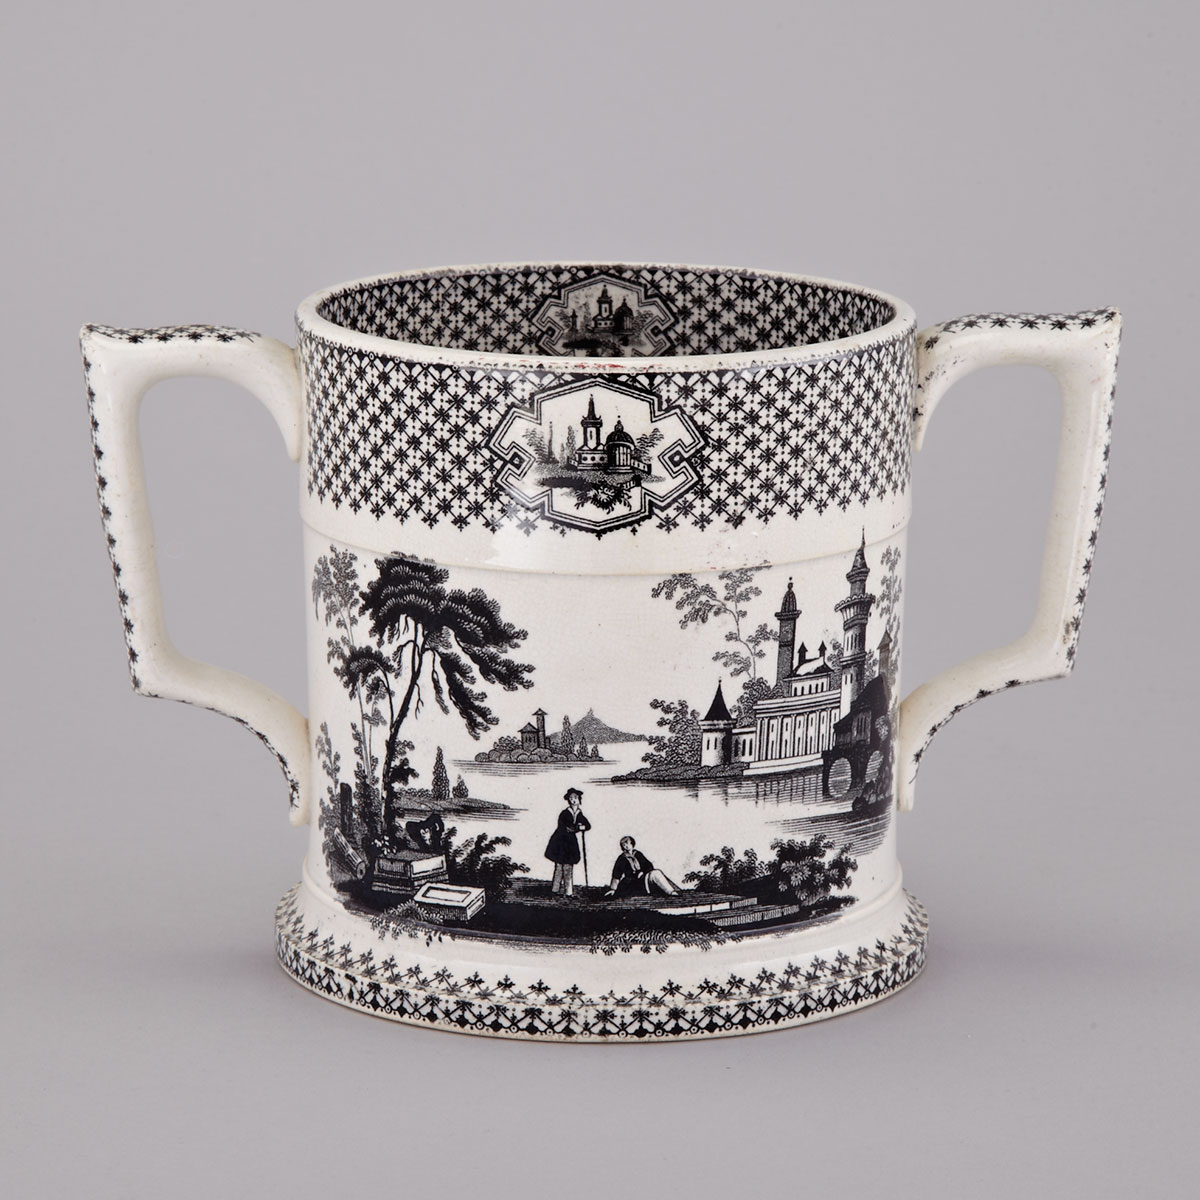 Staffordshire Black Transfer Printed Two-Handled Cup, mid-19th century